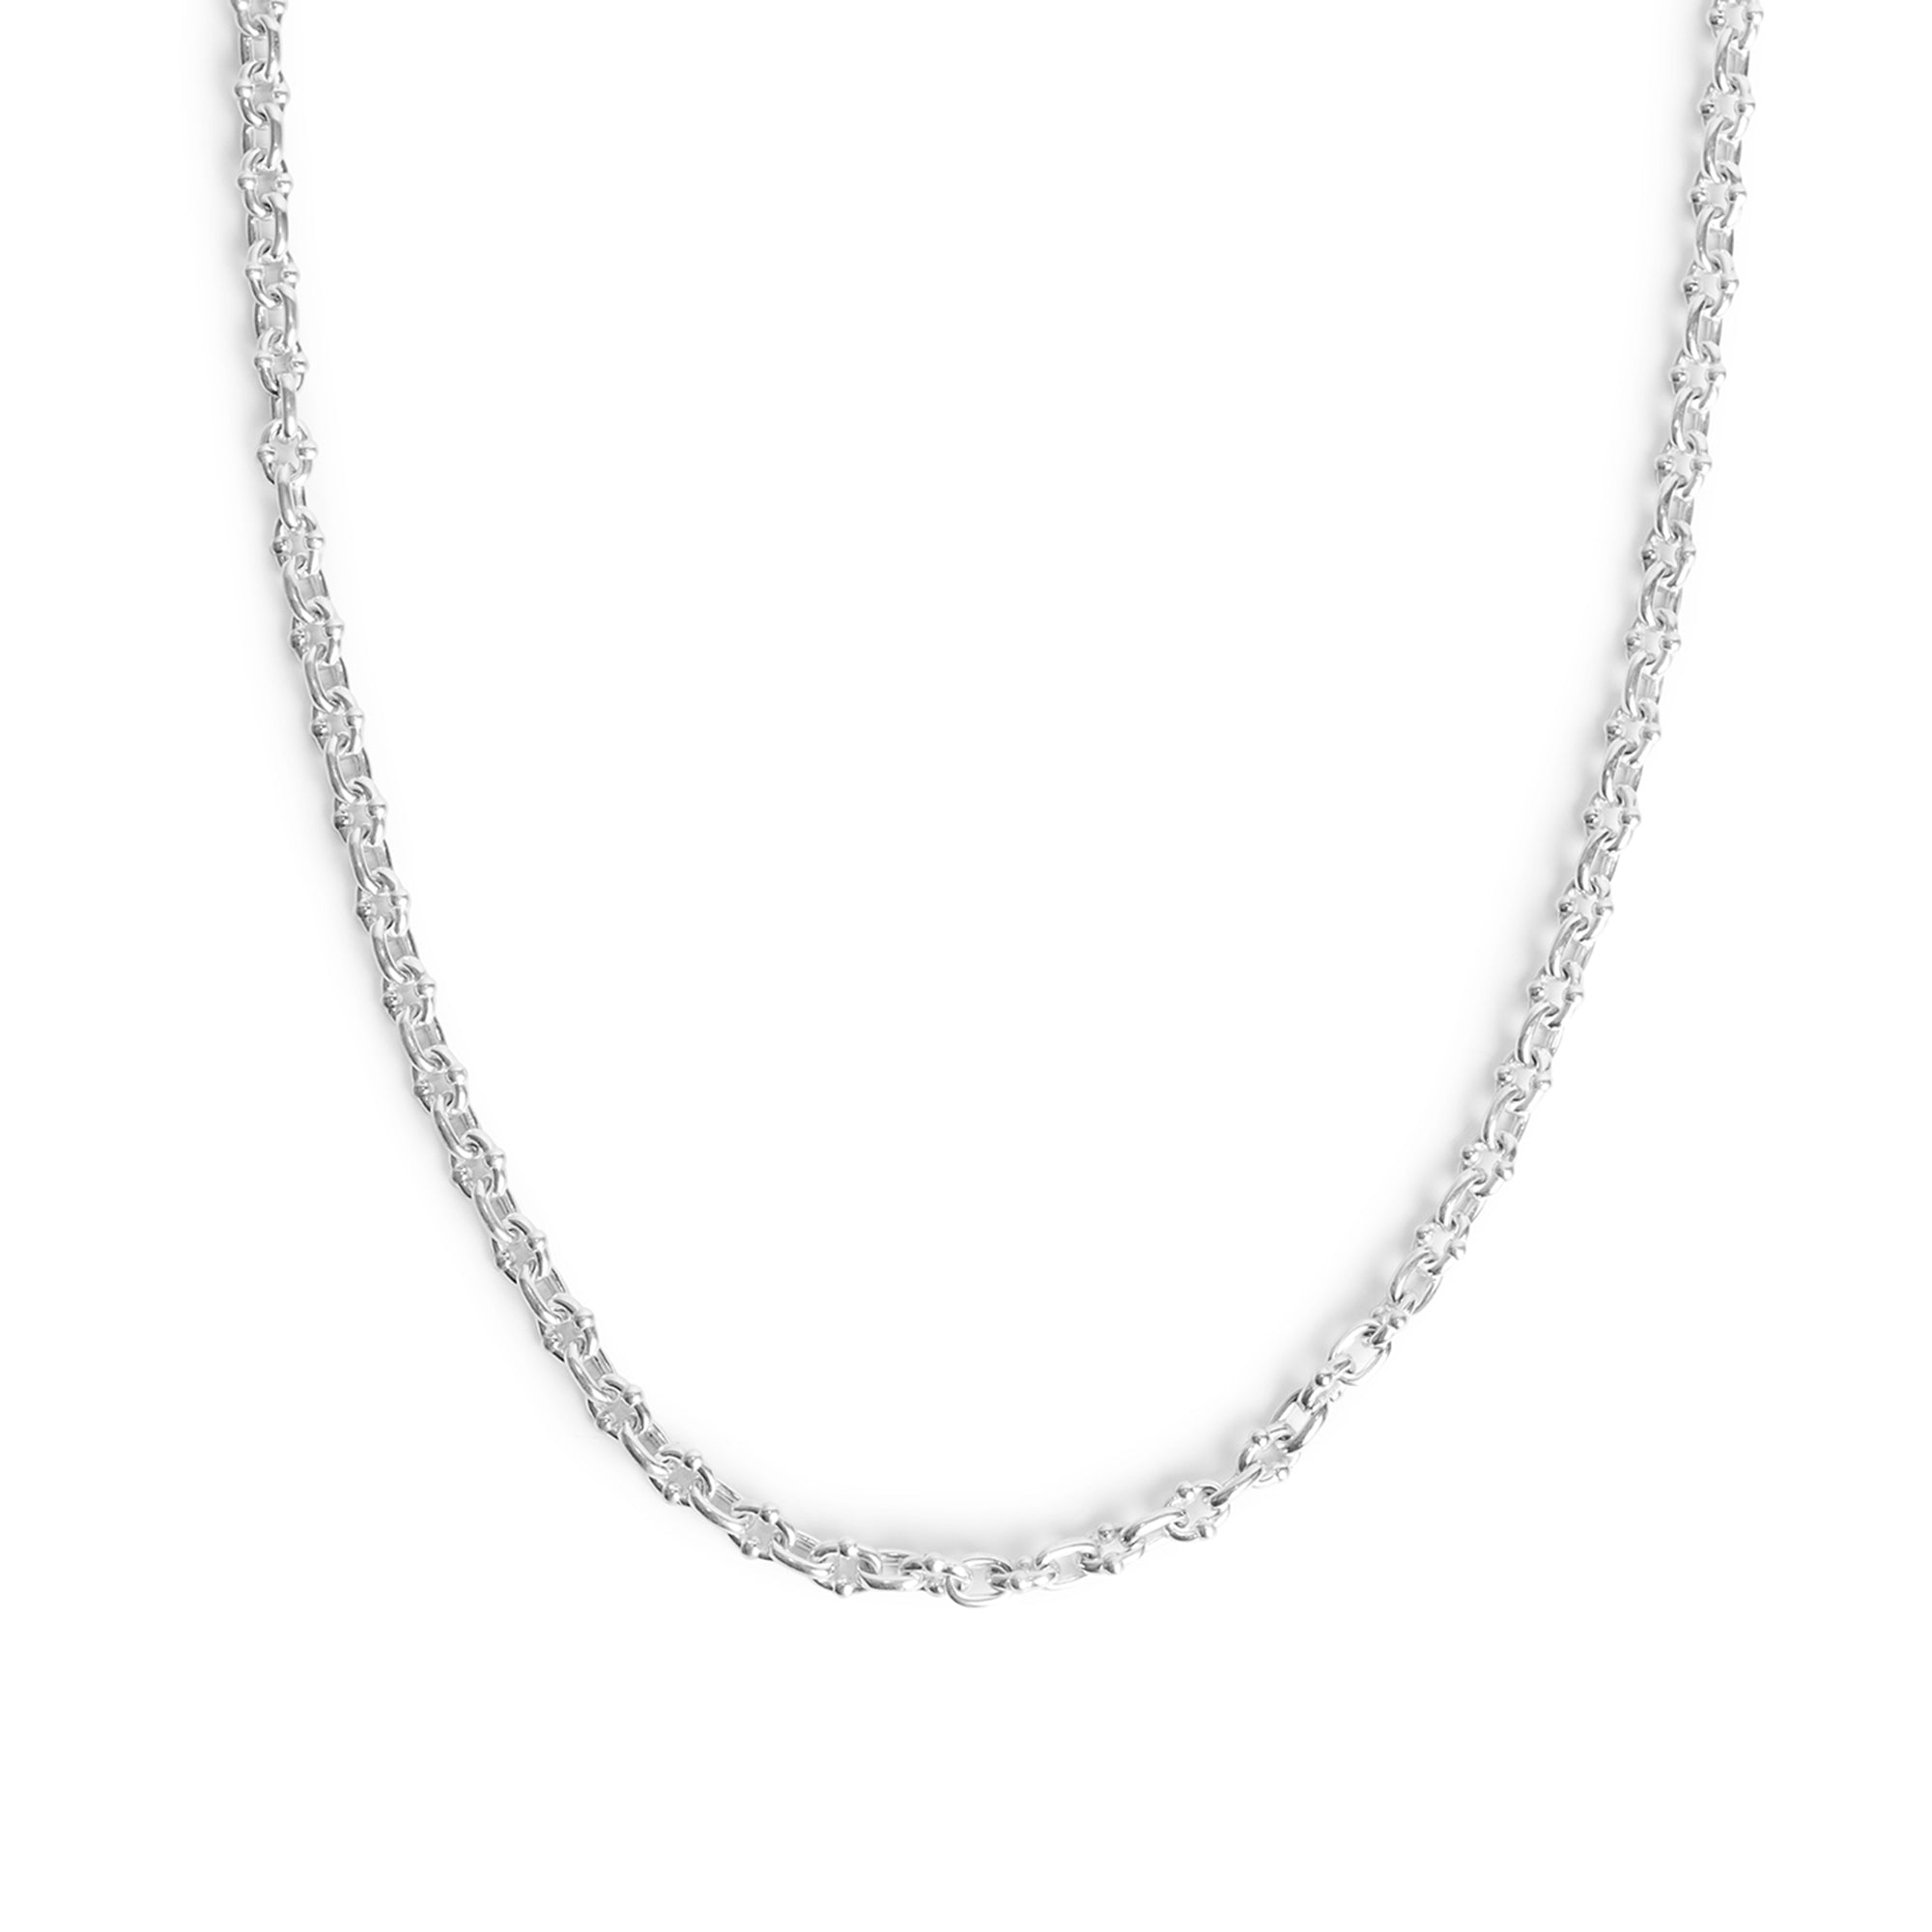 Thin Silver Umlaut Link Necklace